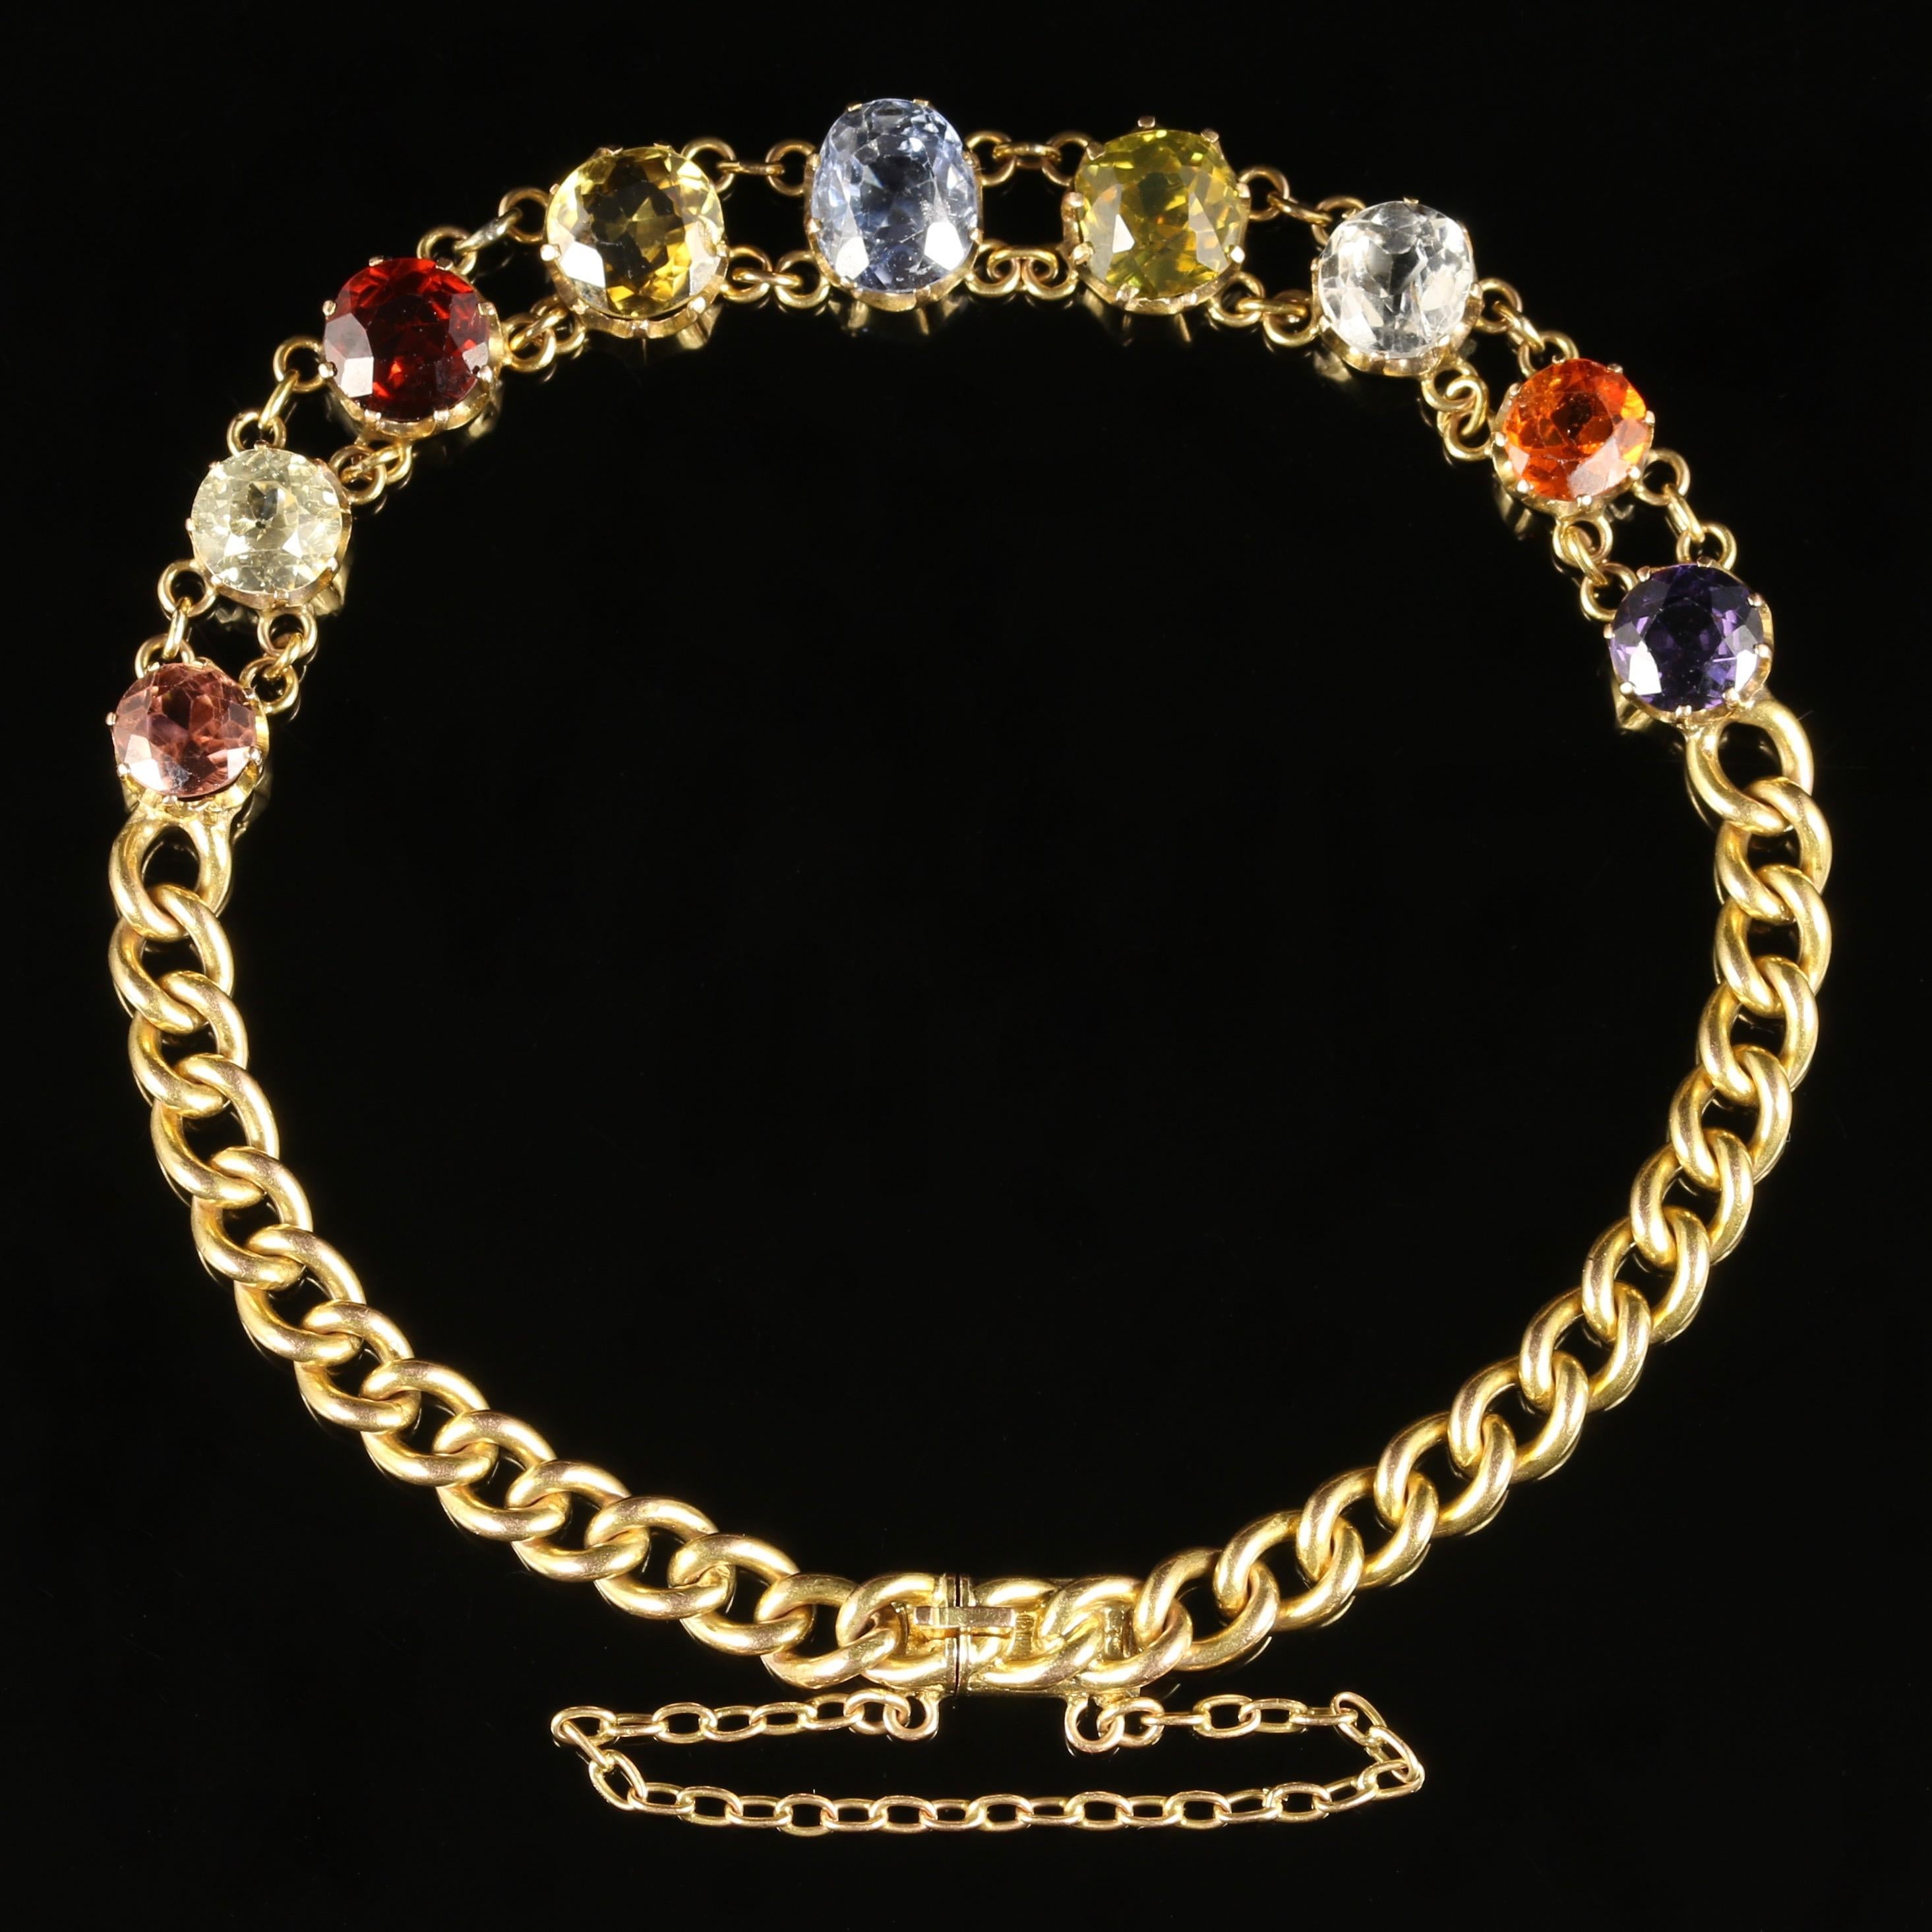 For more details please click continue reading down below...

This fabulous antique Victorian 15ct Yellow Gold bracelet is set with over 50ct of Gemstones from the Victorian Era.

Circa 1890.

The stones are set into a beautiful Gold curb link